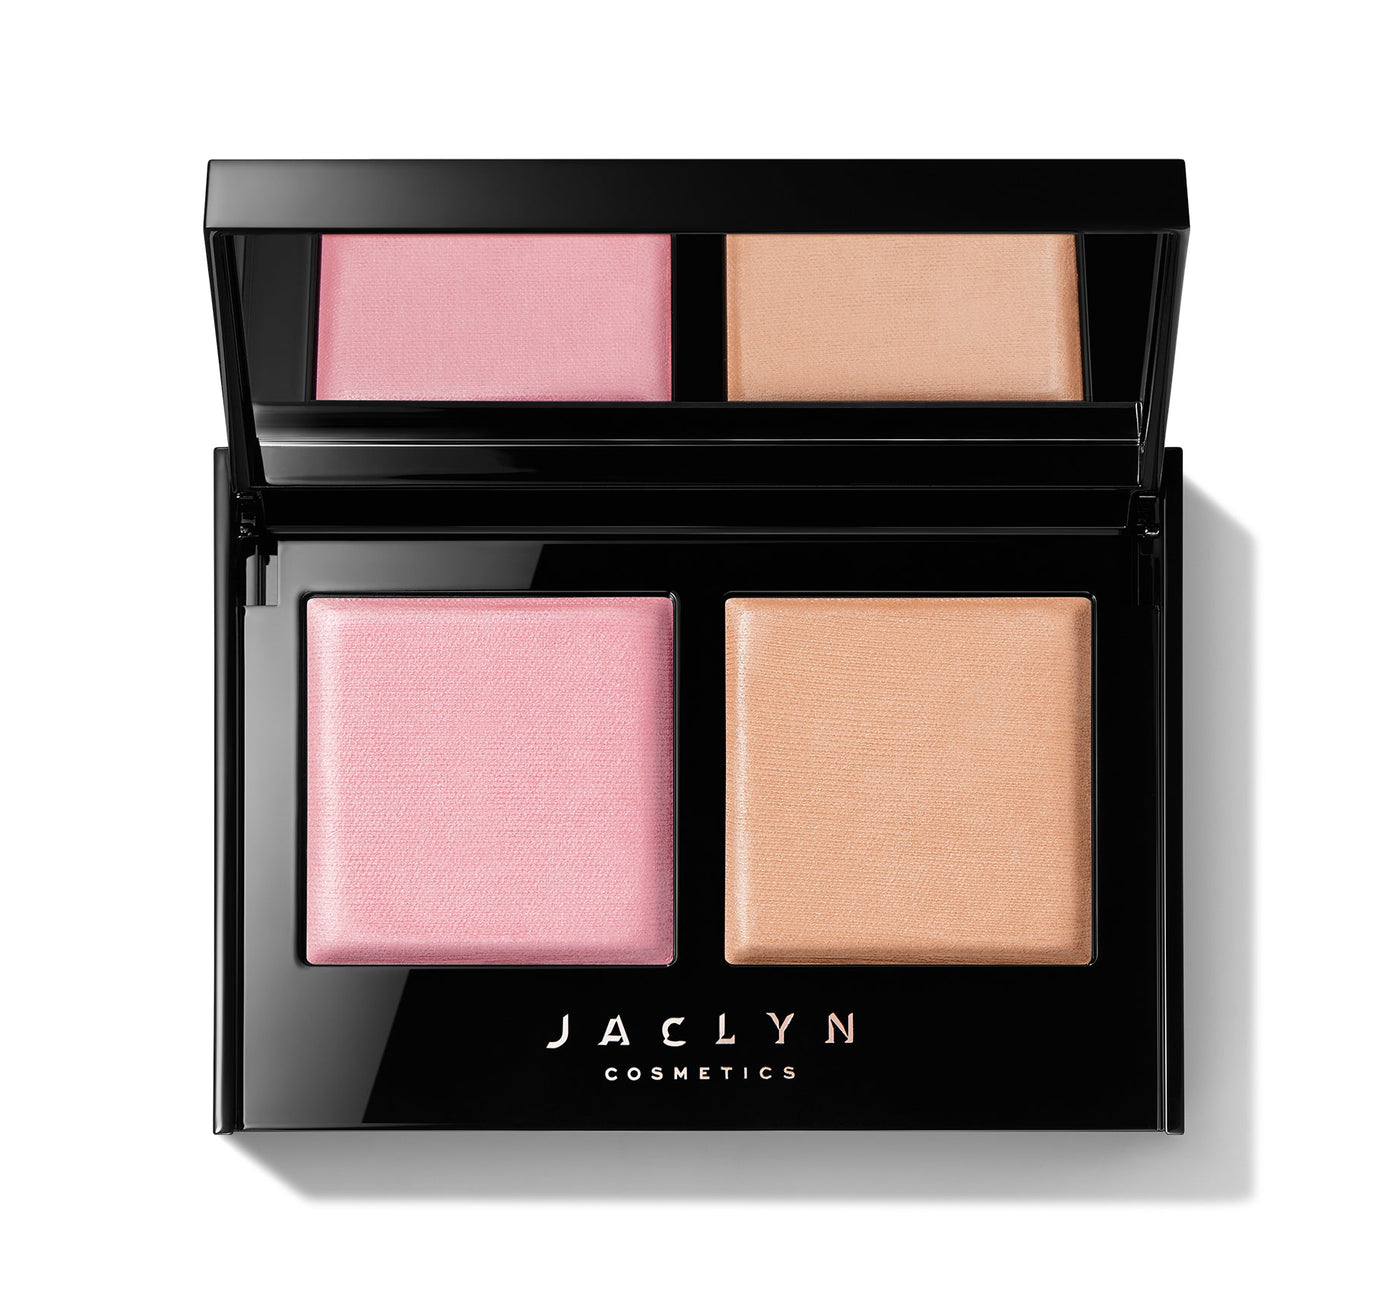 Jaclyn Cosmetics - Bronzer and Blush Duo + Accent Light